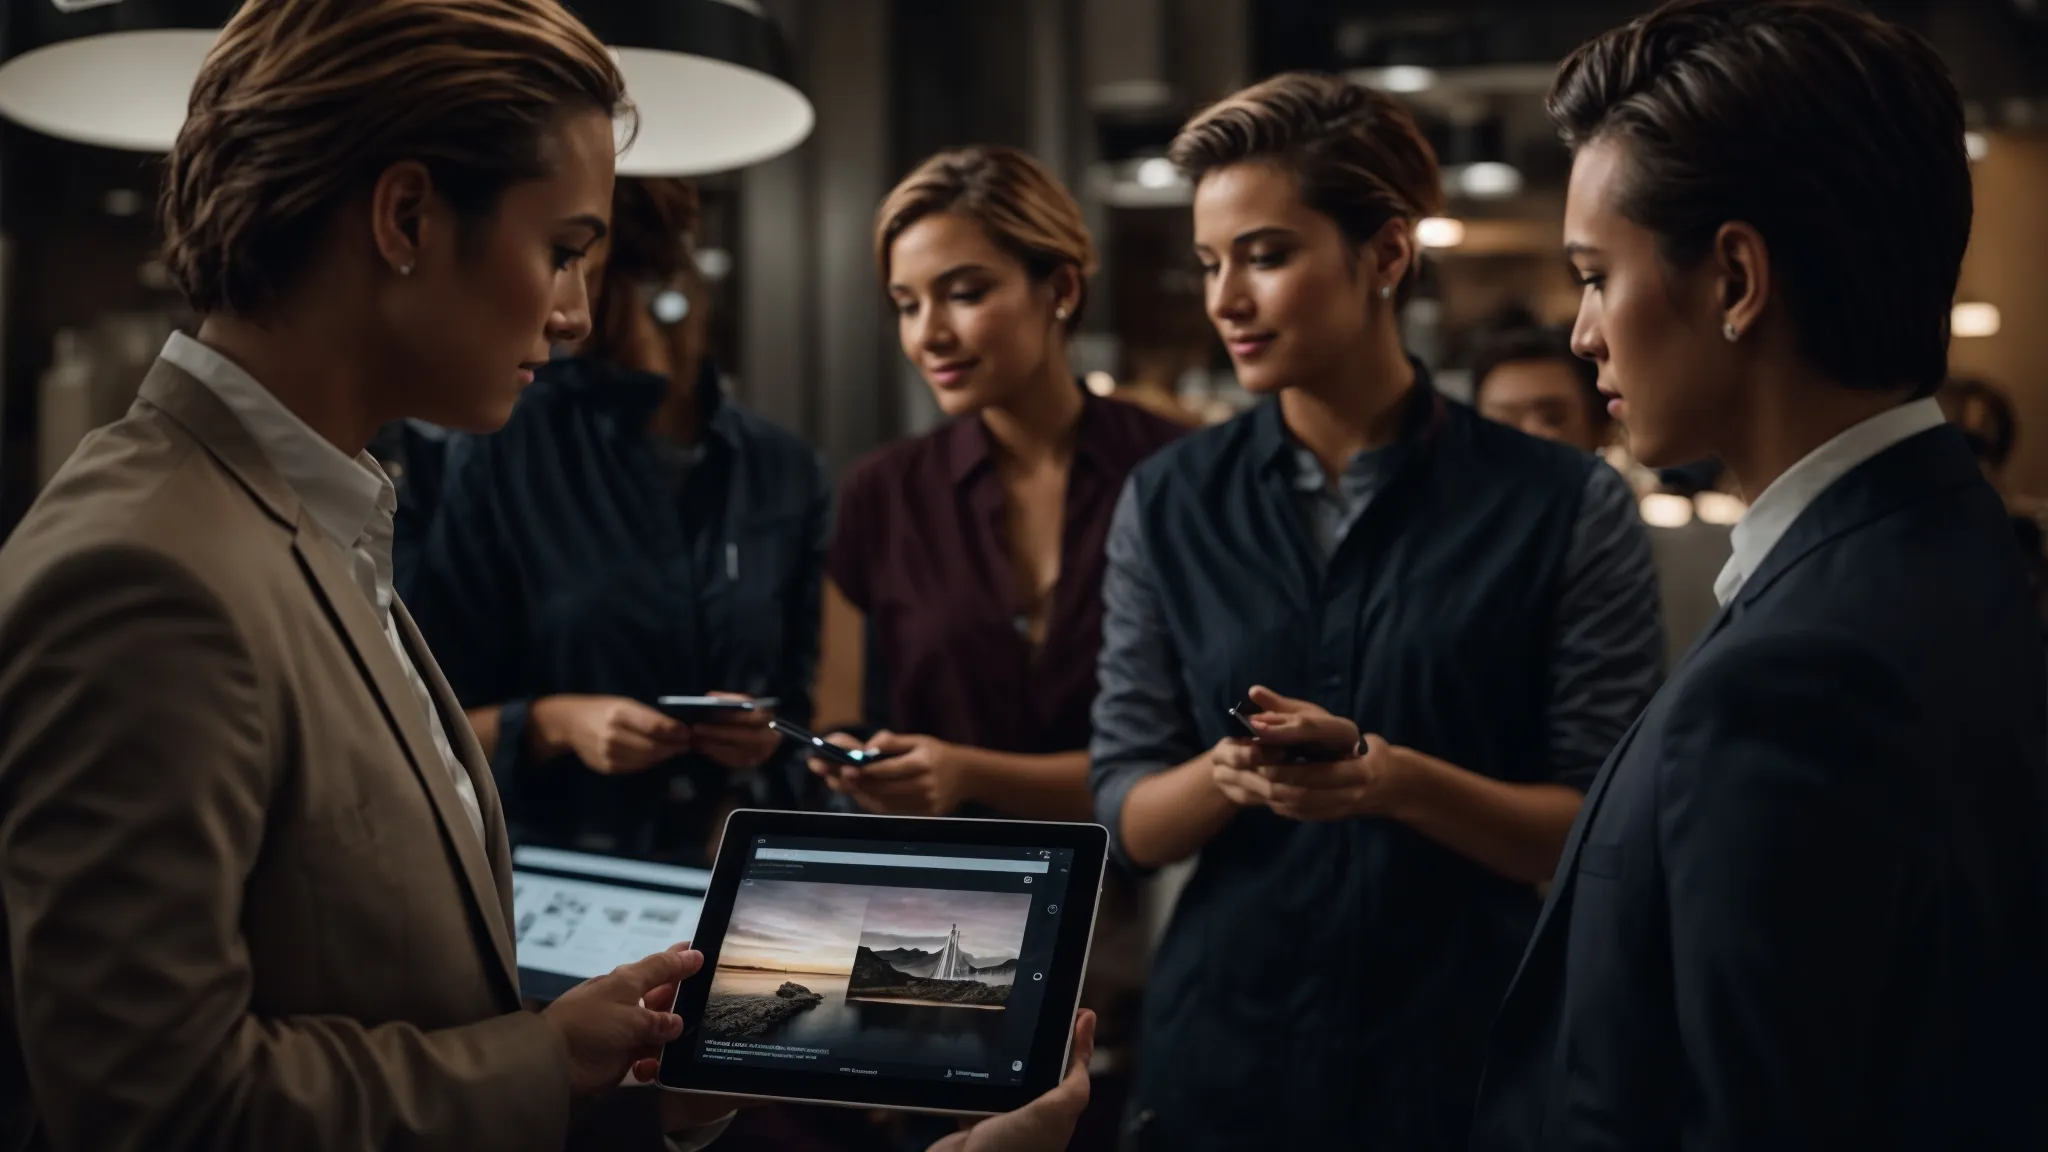 a group of professionals gathered around a digital tablet where one person is showcasing to others a glowing customer review on their company website.